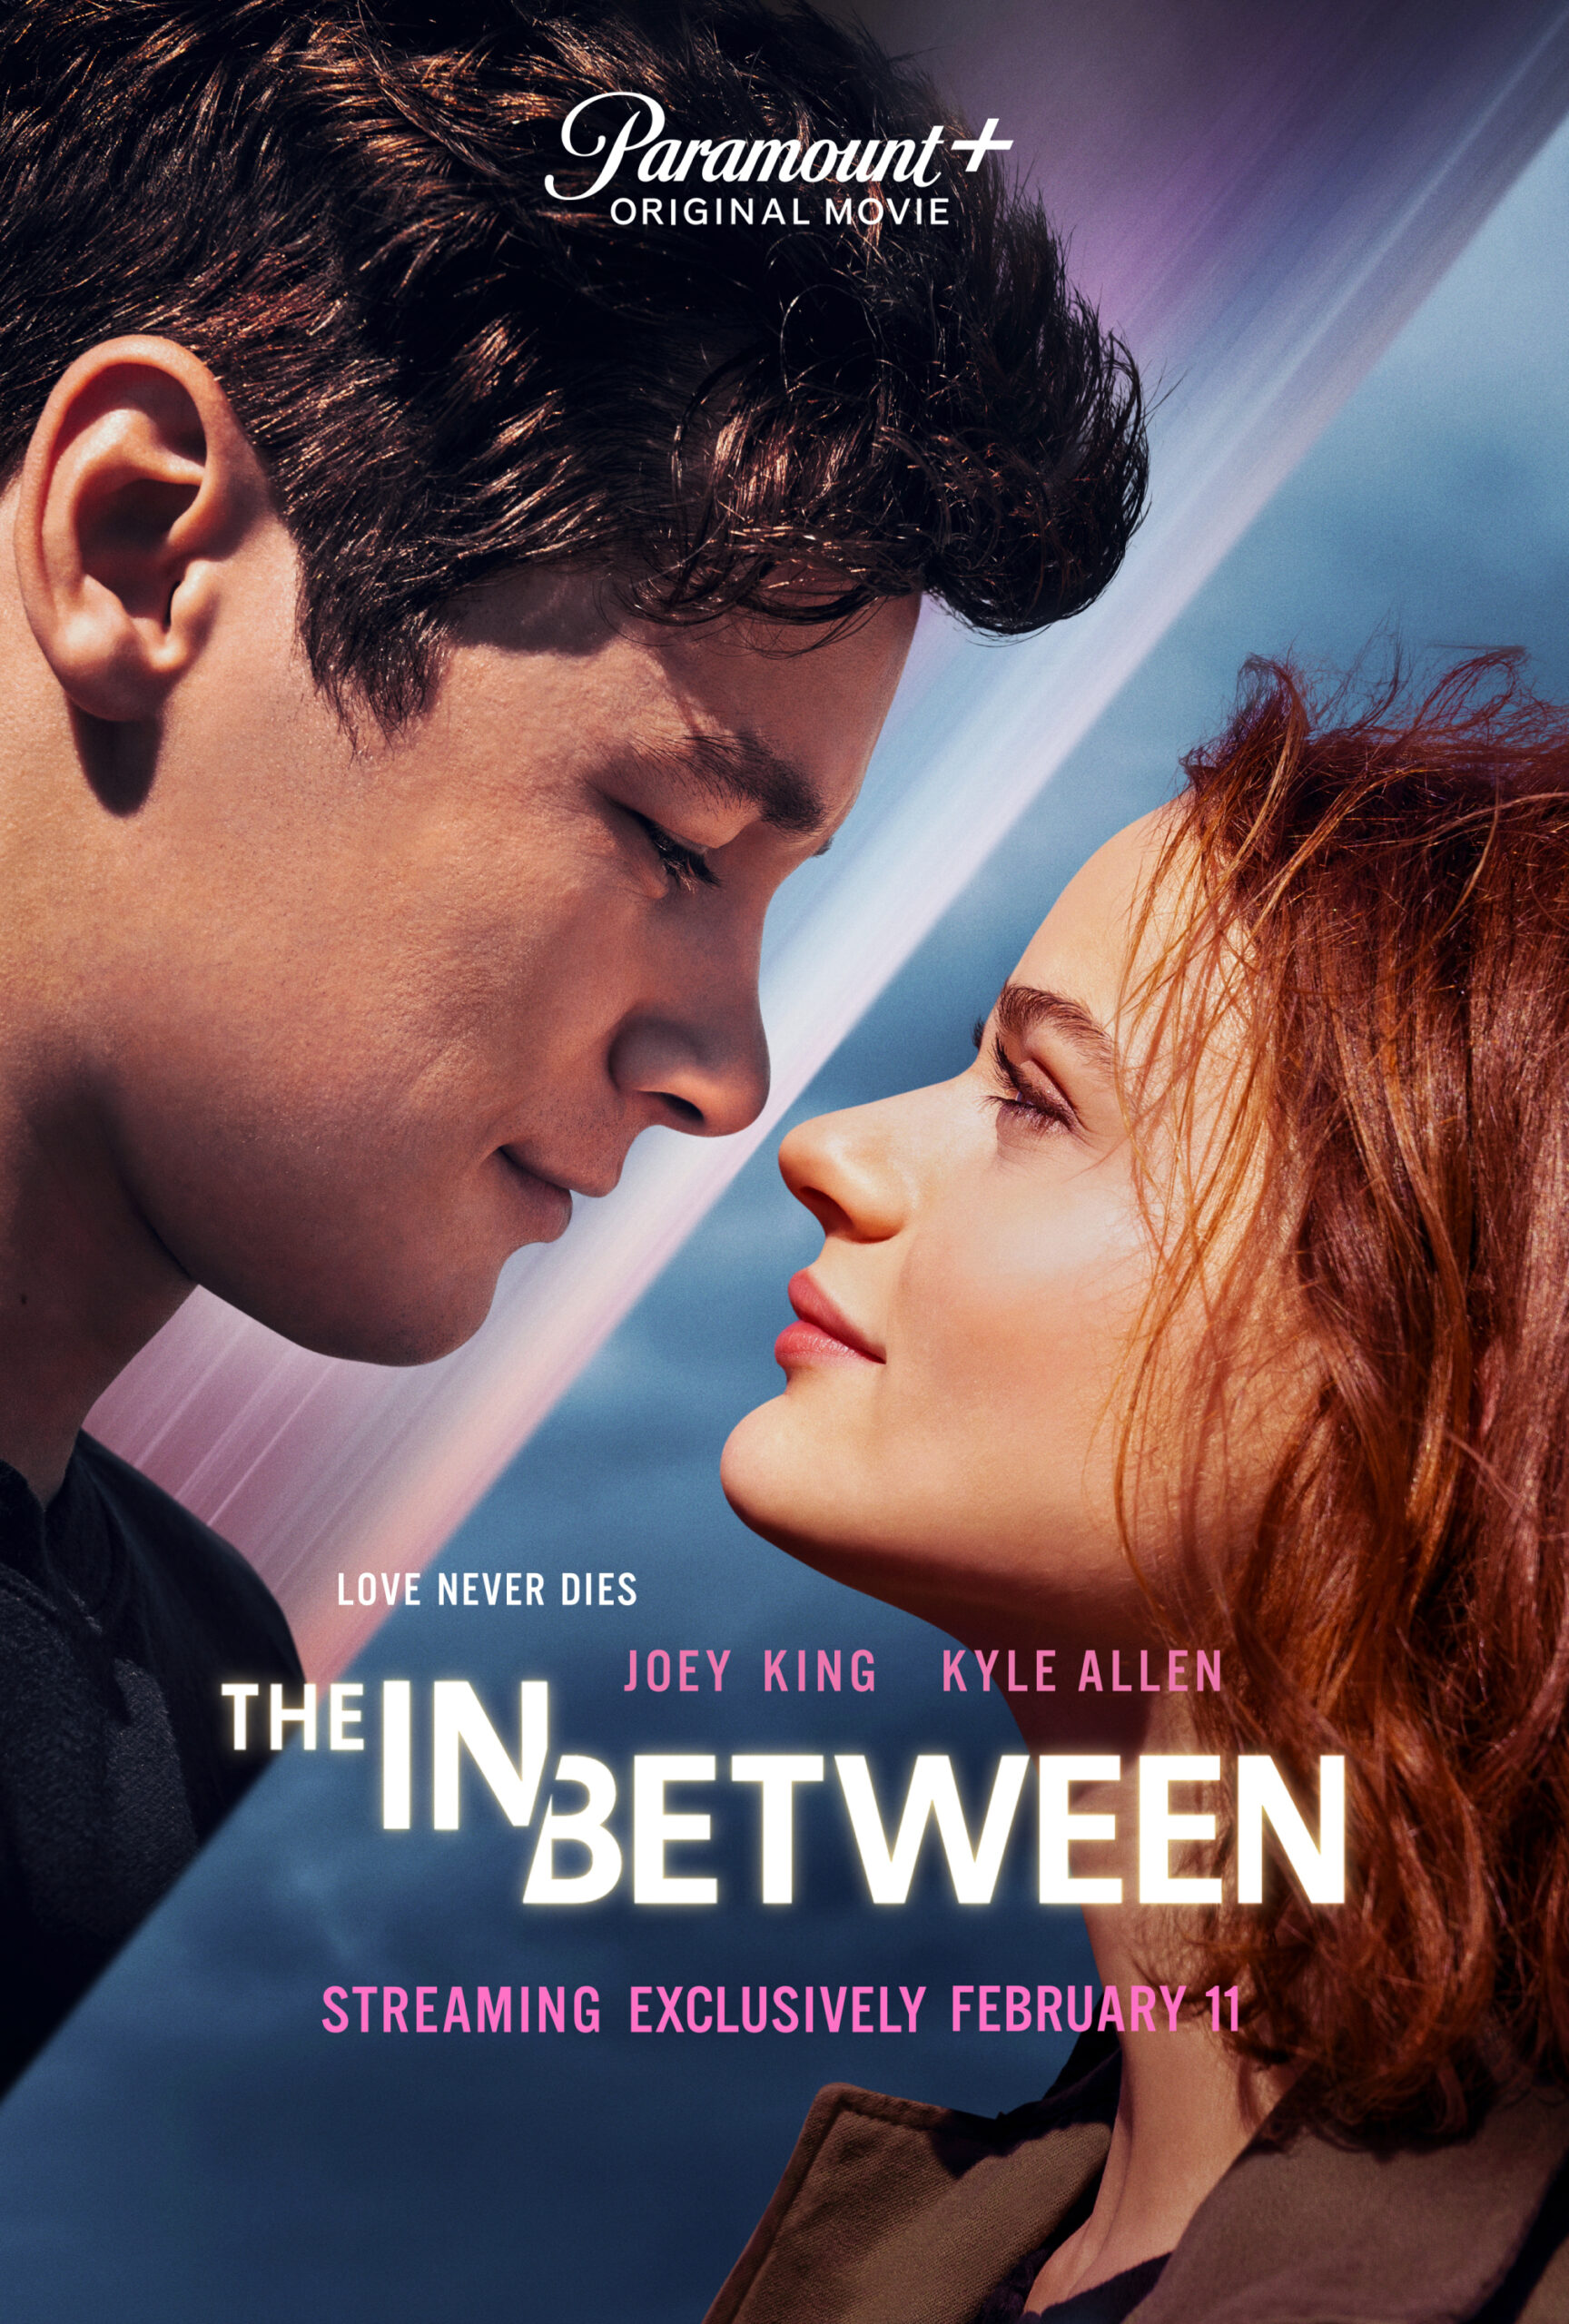 Is “The In Between” on Paramount+